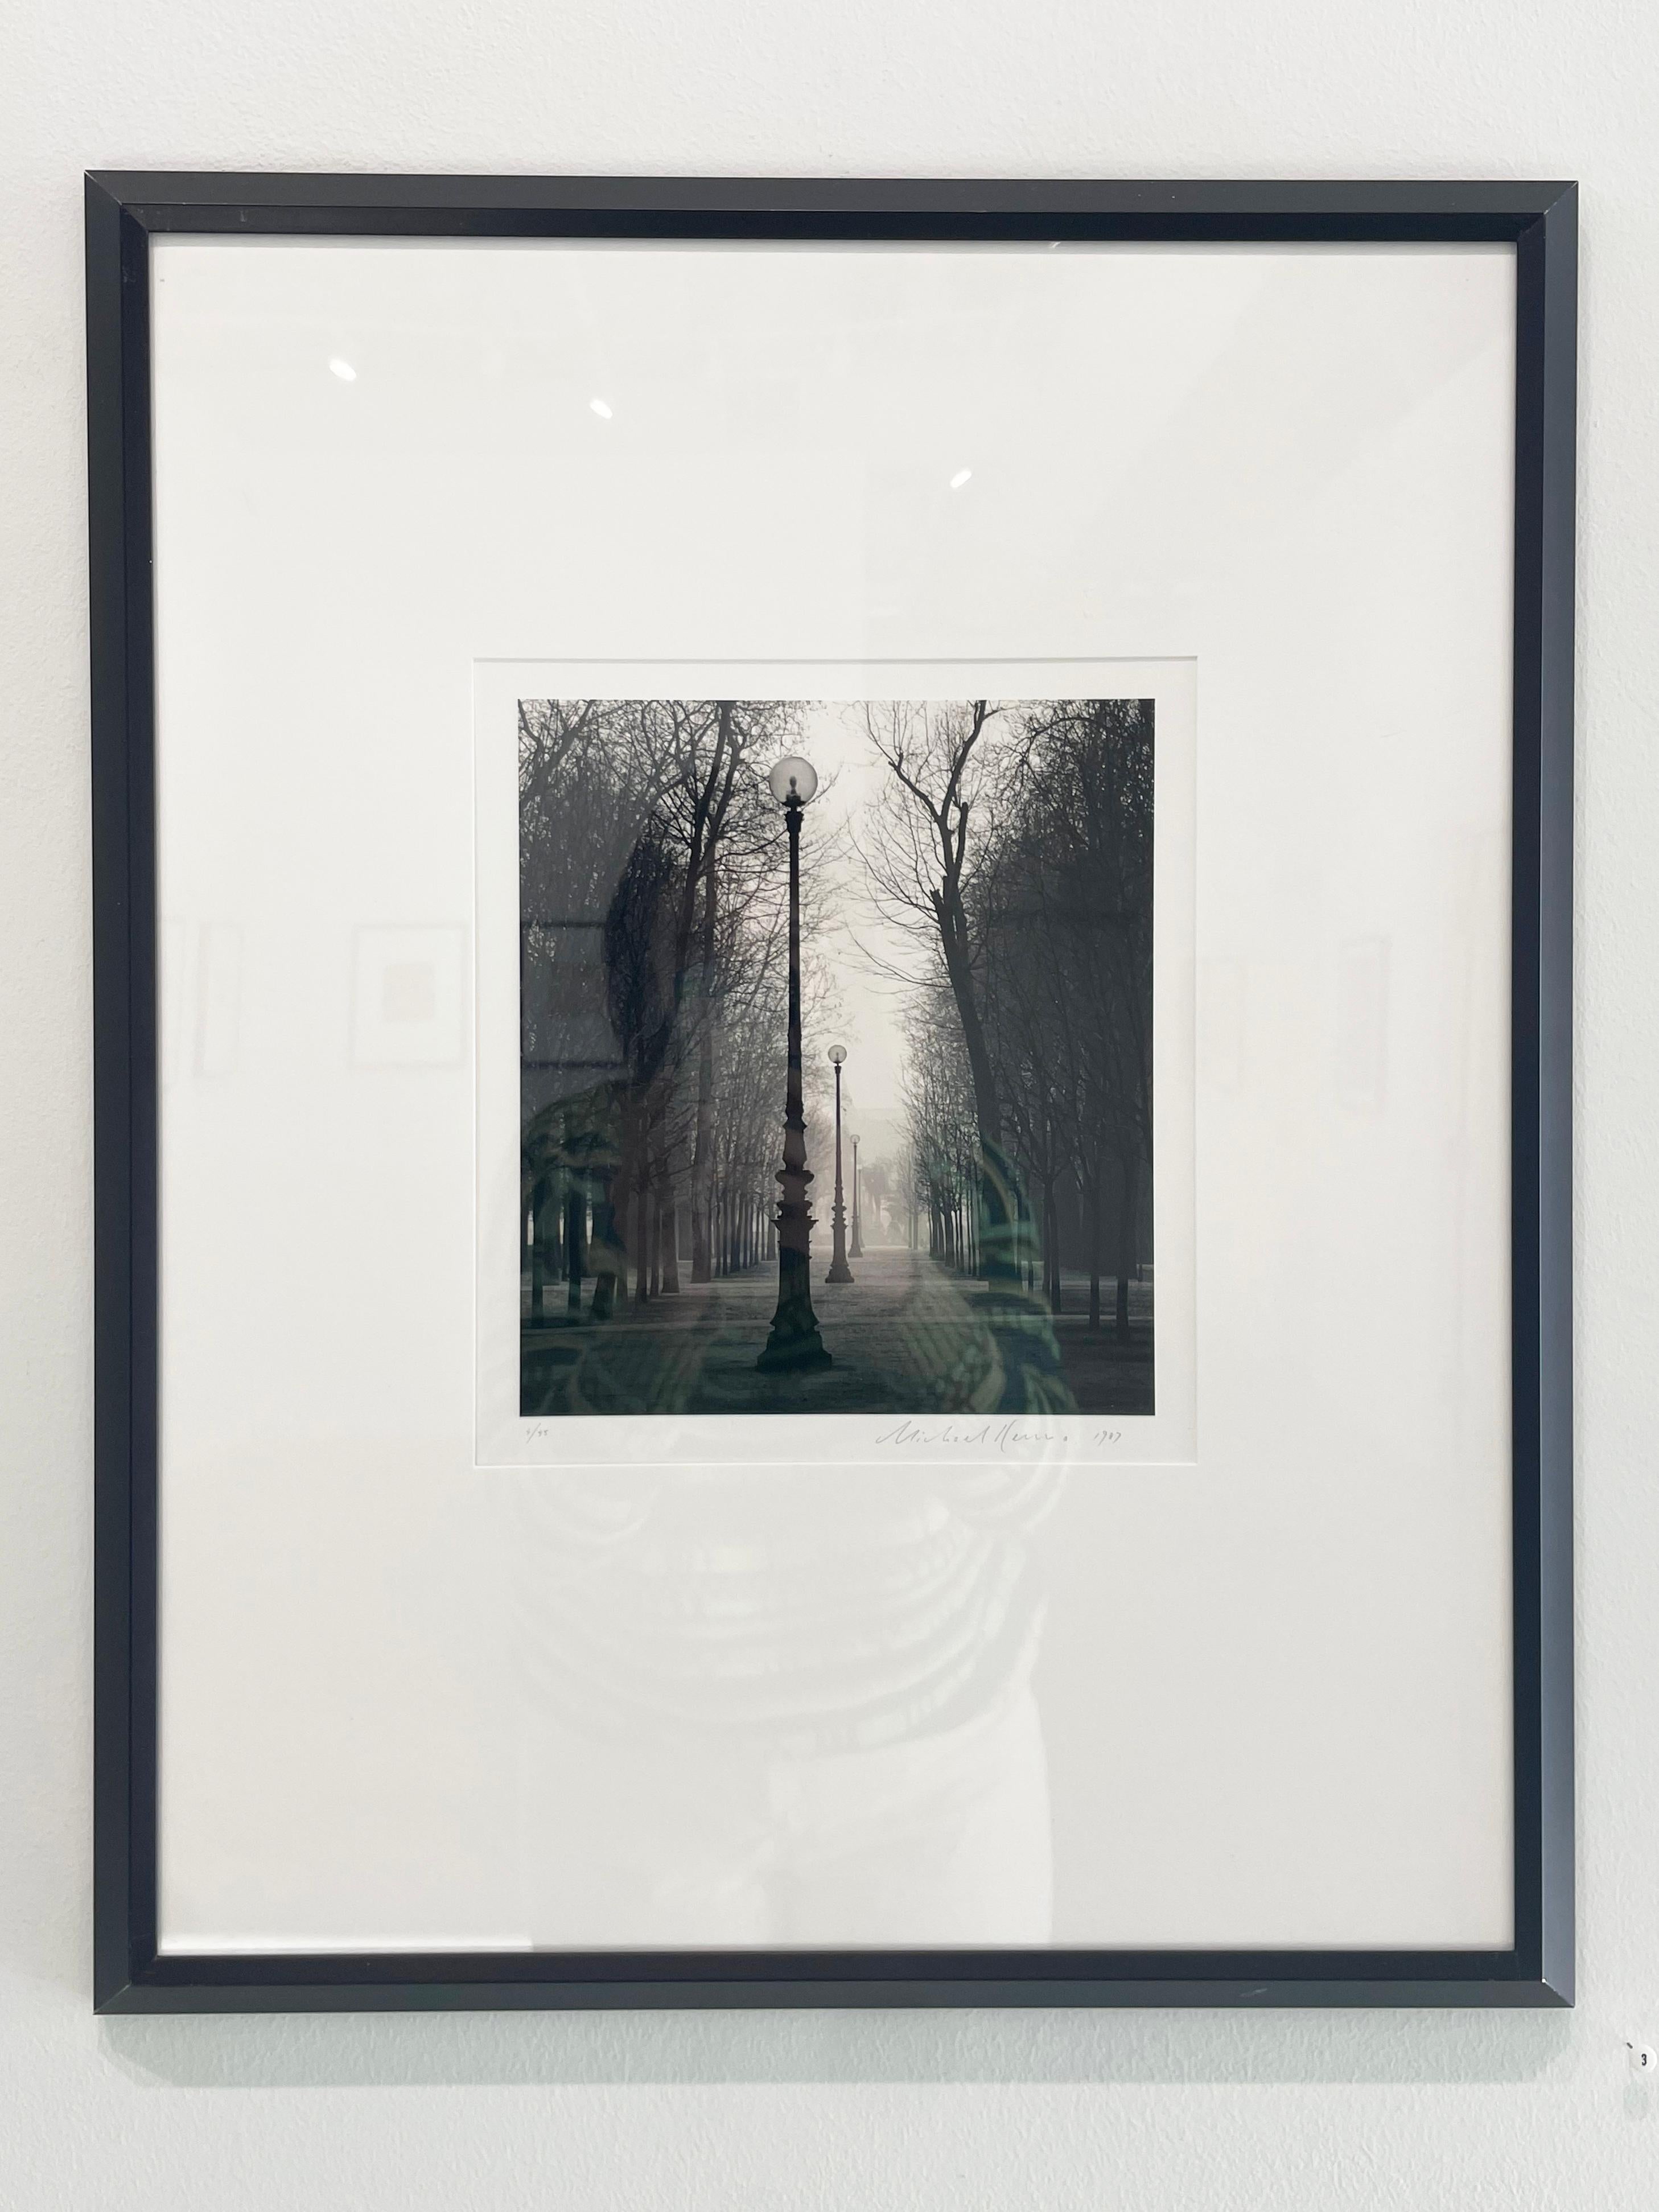 Edition of 45
Signed, titled, negative date, print date and numbered by Michael Kenna
Sepia toned gelatin silver print

Michael Kenna's black and white photographs are powerful and alluring. His imagery transports you to iconic and placid landscapes